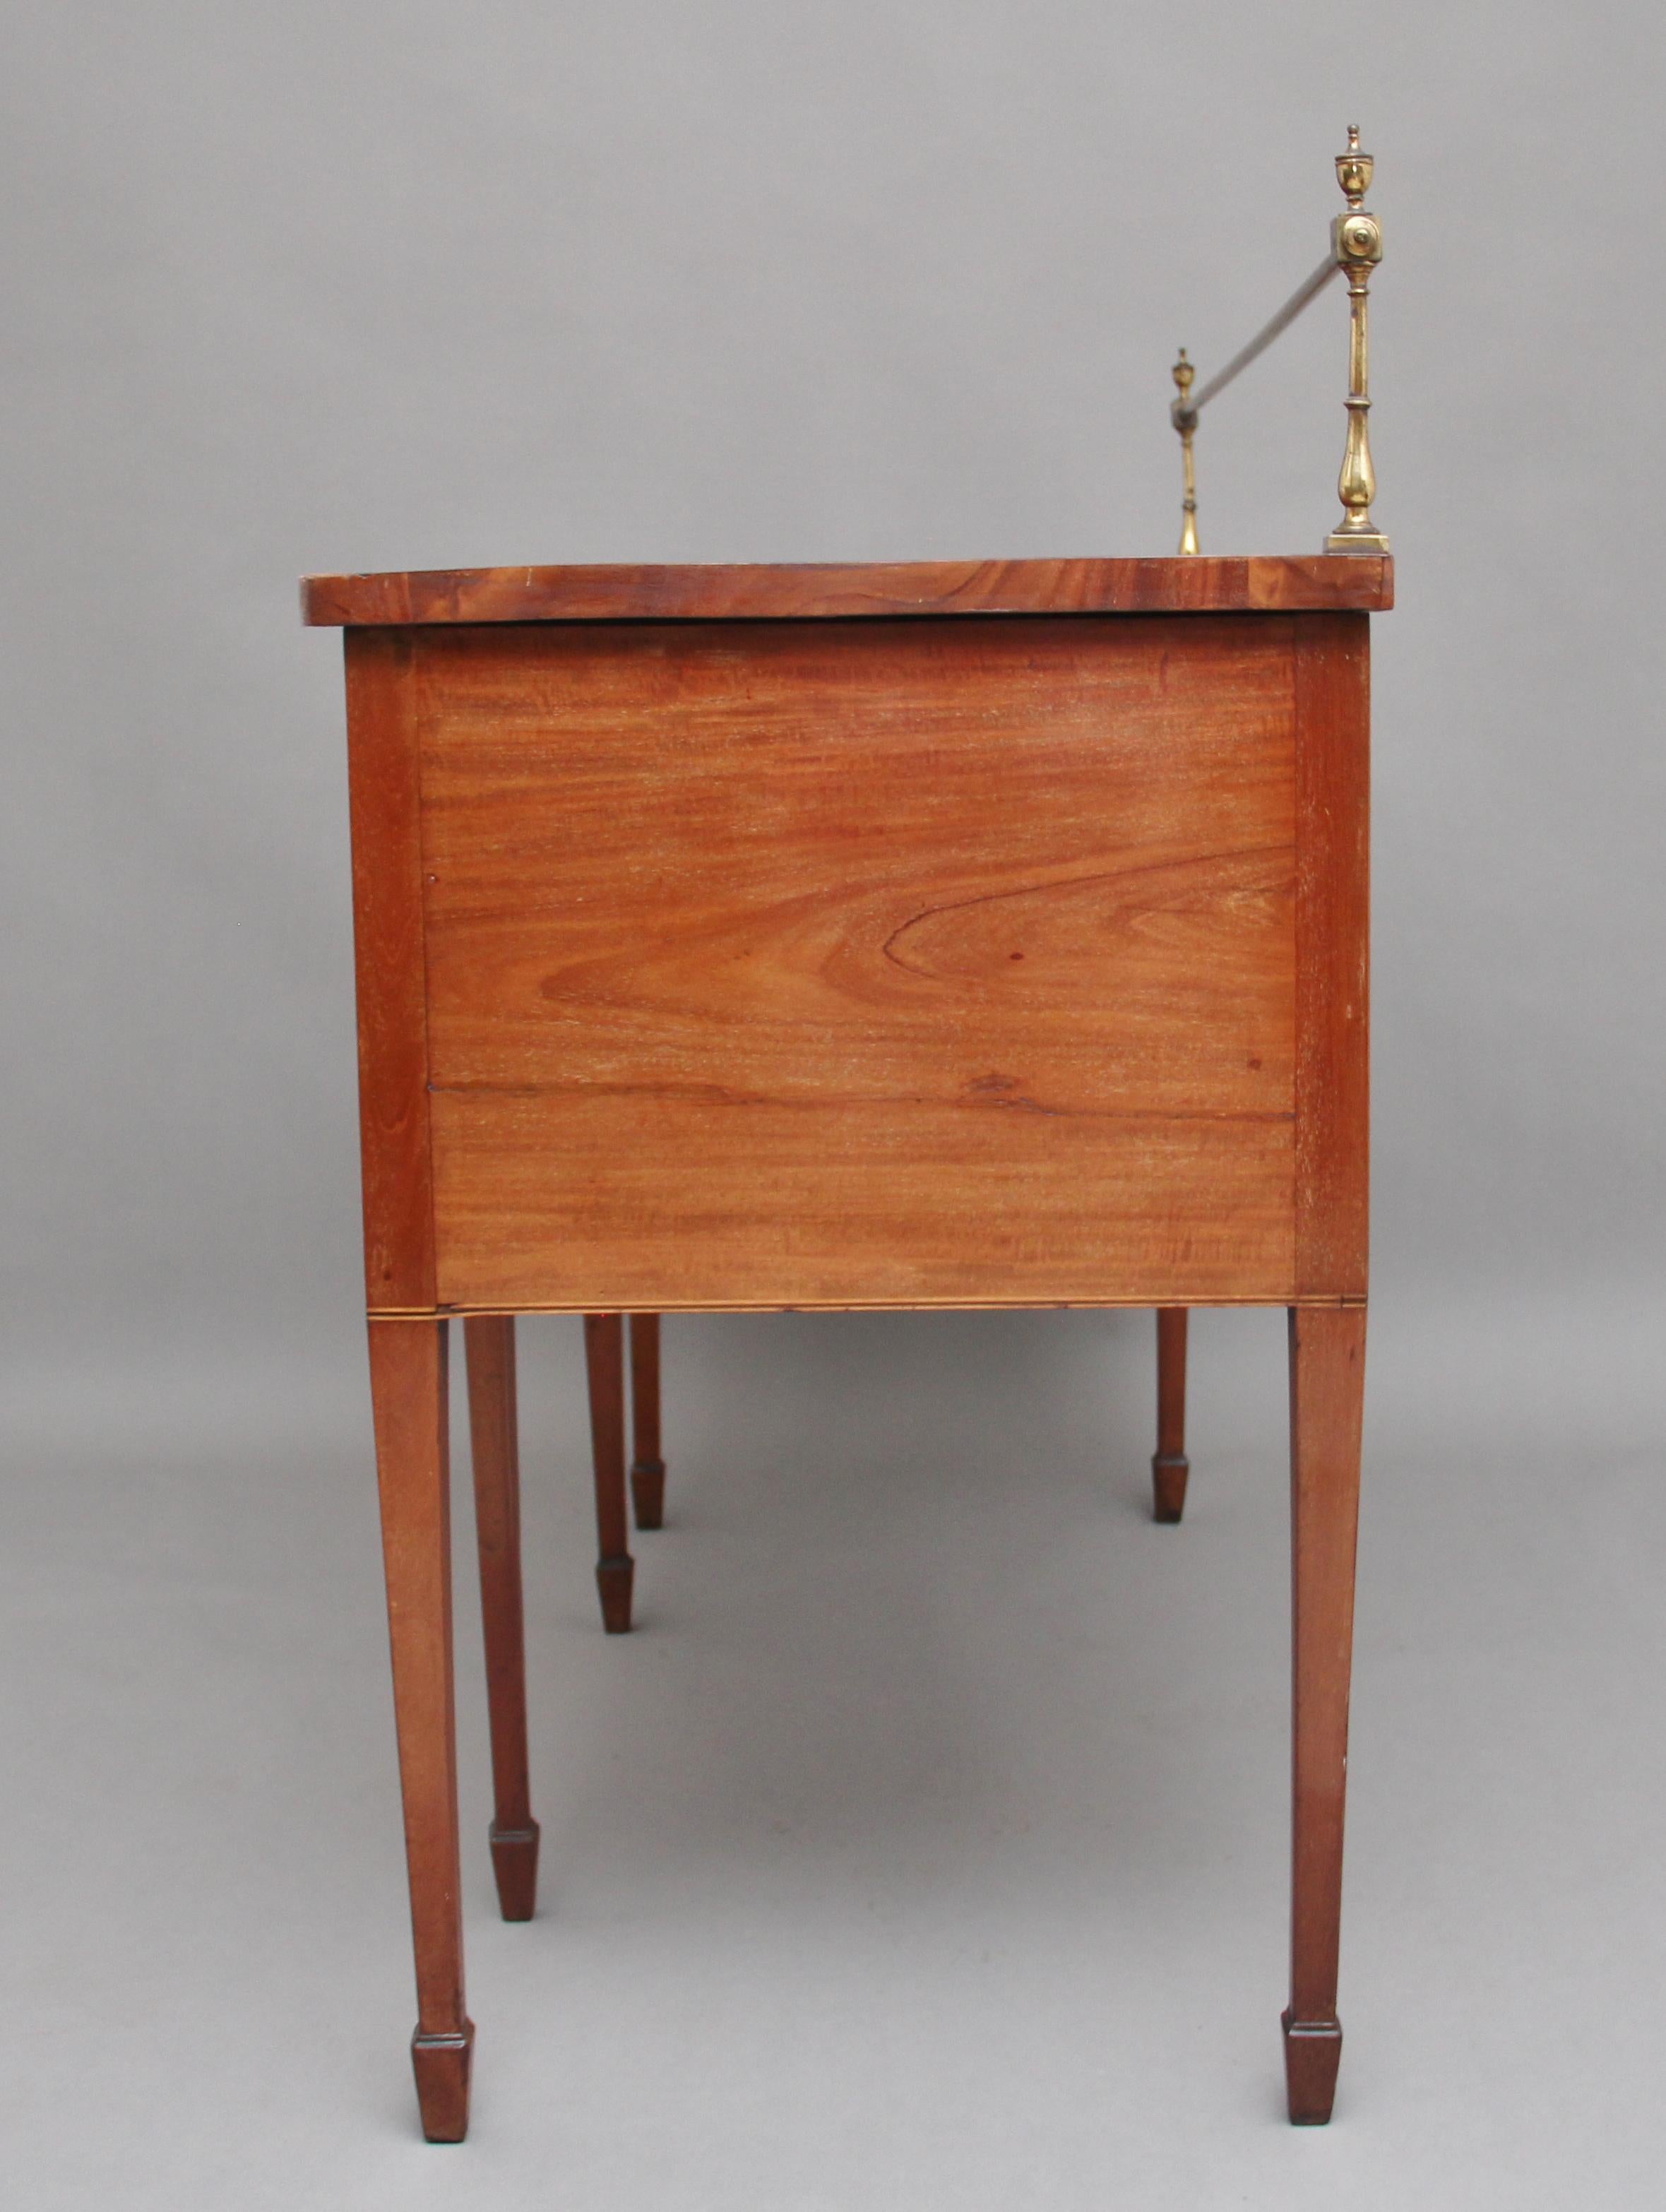 Early 19th Century Mahogany Inlaid Serpentine Sideboard In Good Condition For Sale In Martlesham, GB